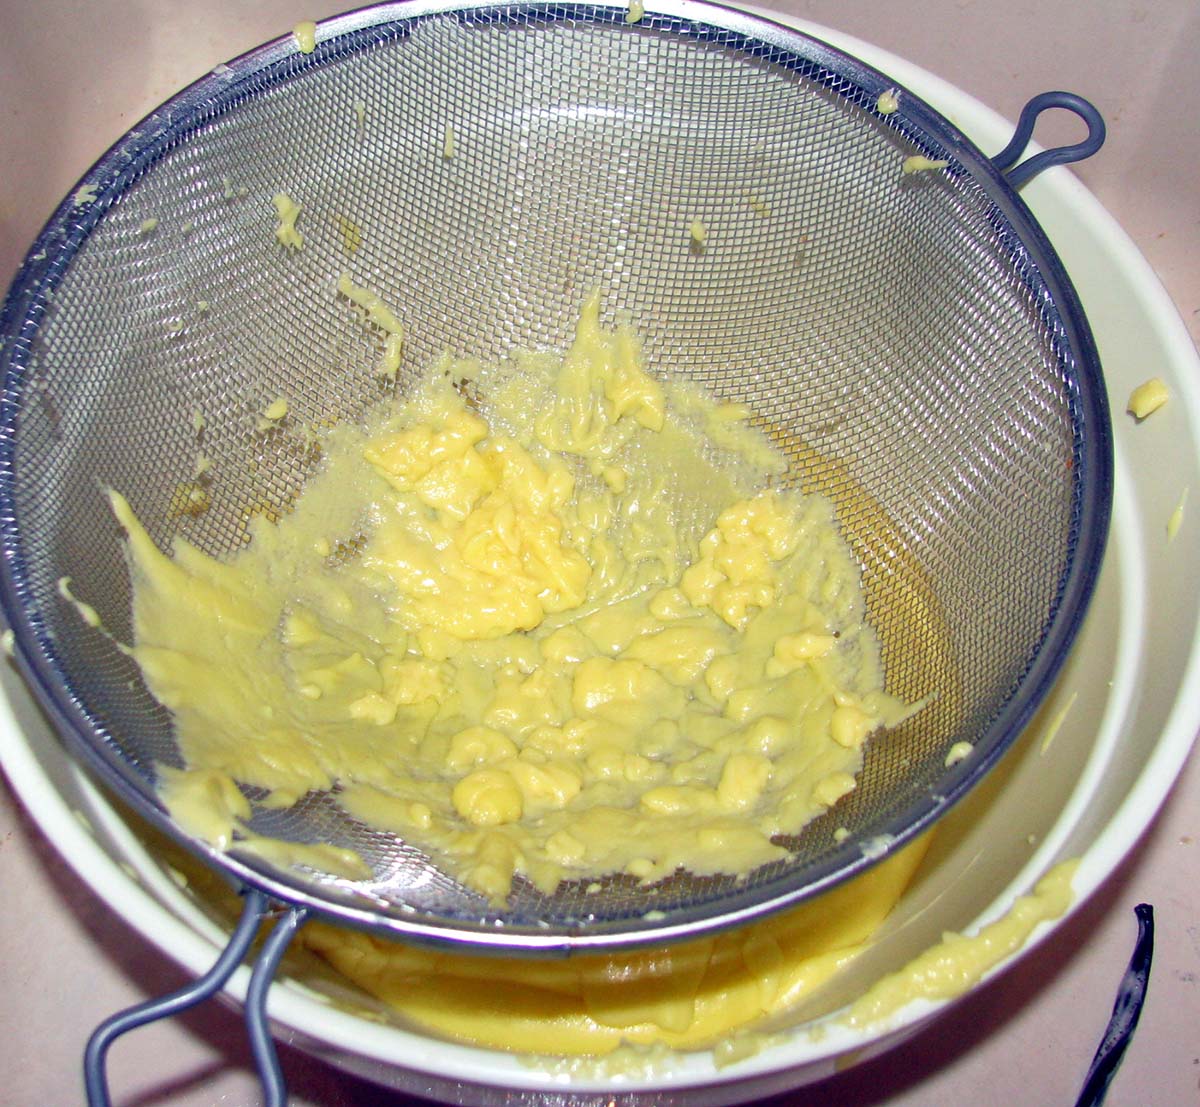 Custard strained in a metal sieve over a white bowl.